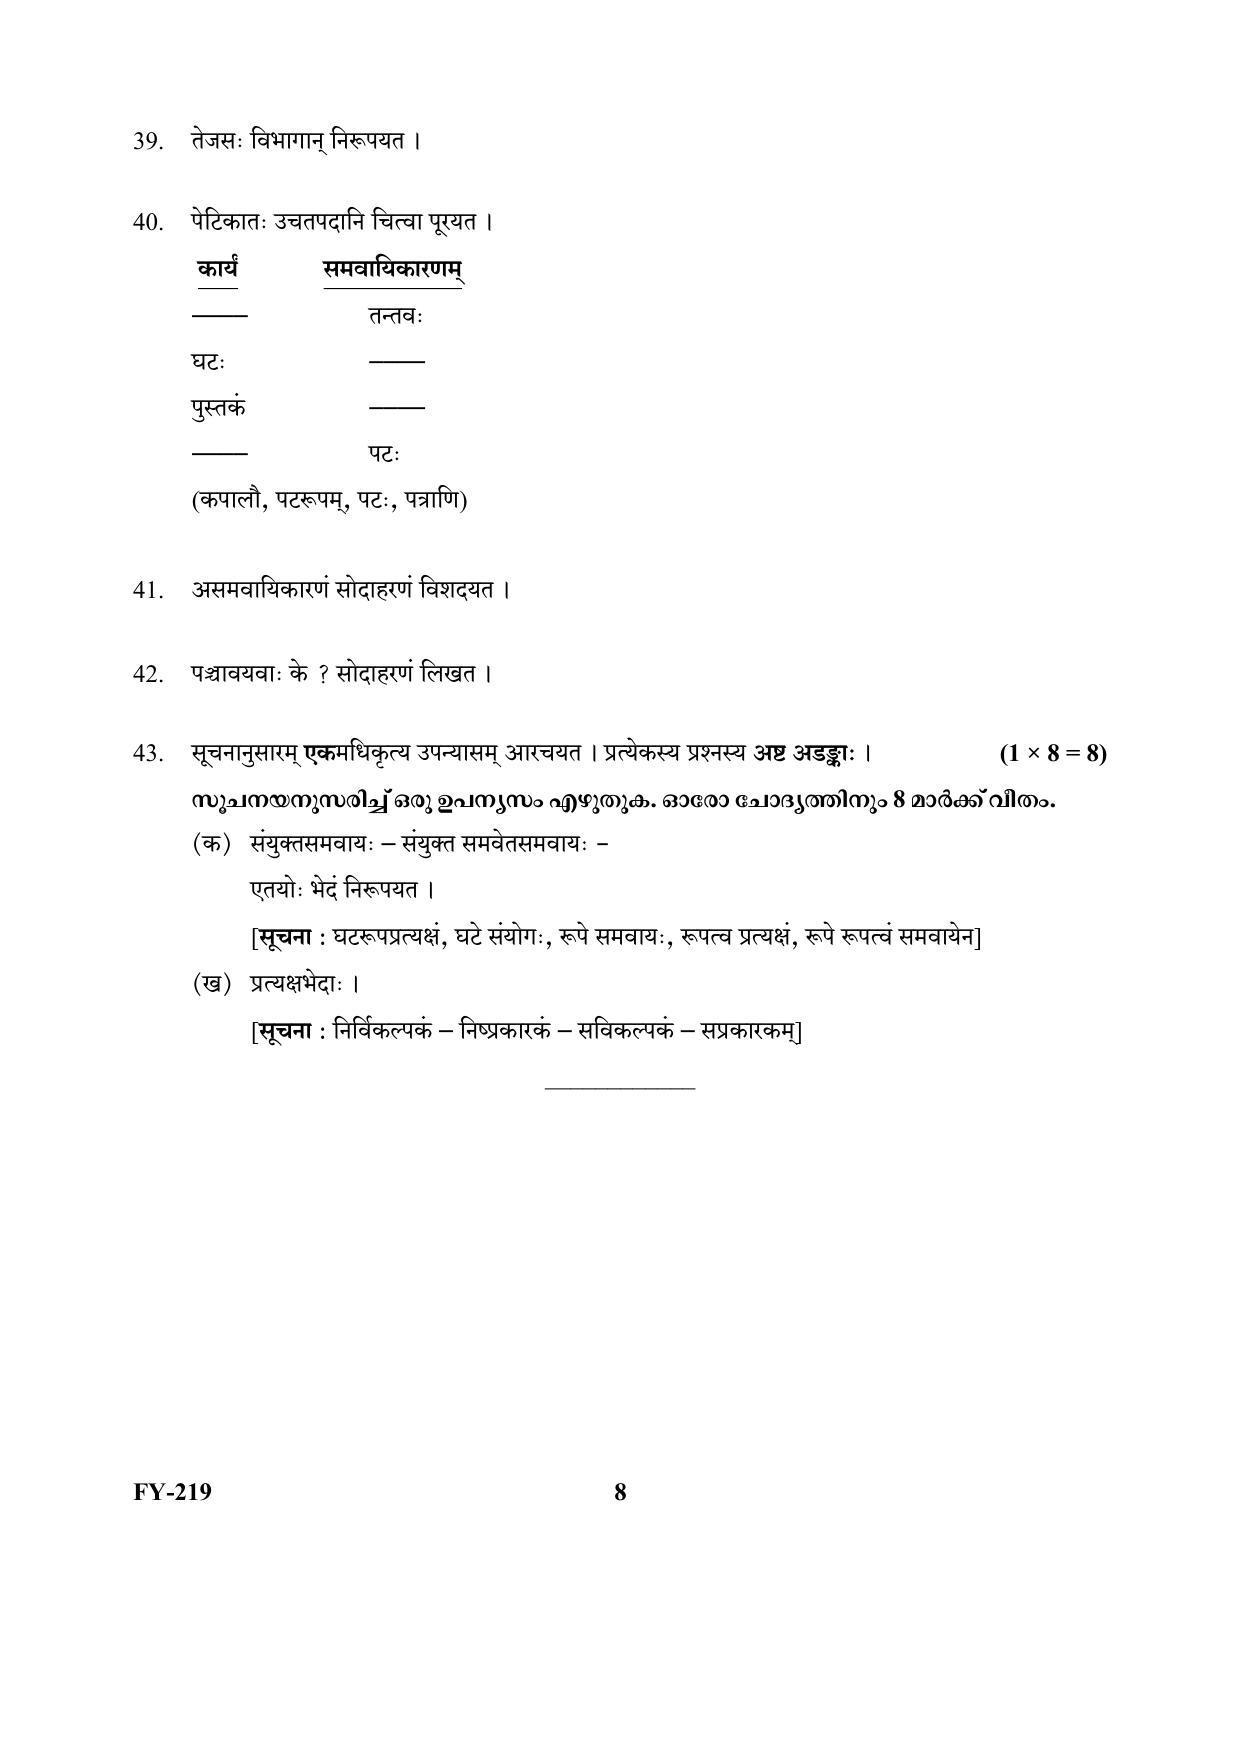 Kerala Plus One (Class 11th) Part-III Sanskrit Sasthra-Optional Question Paper 2021 - Page 8